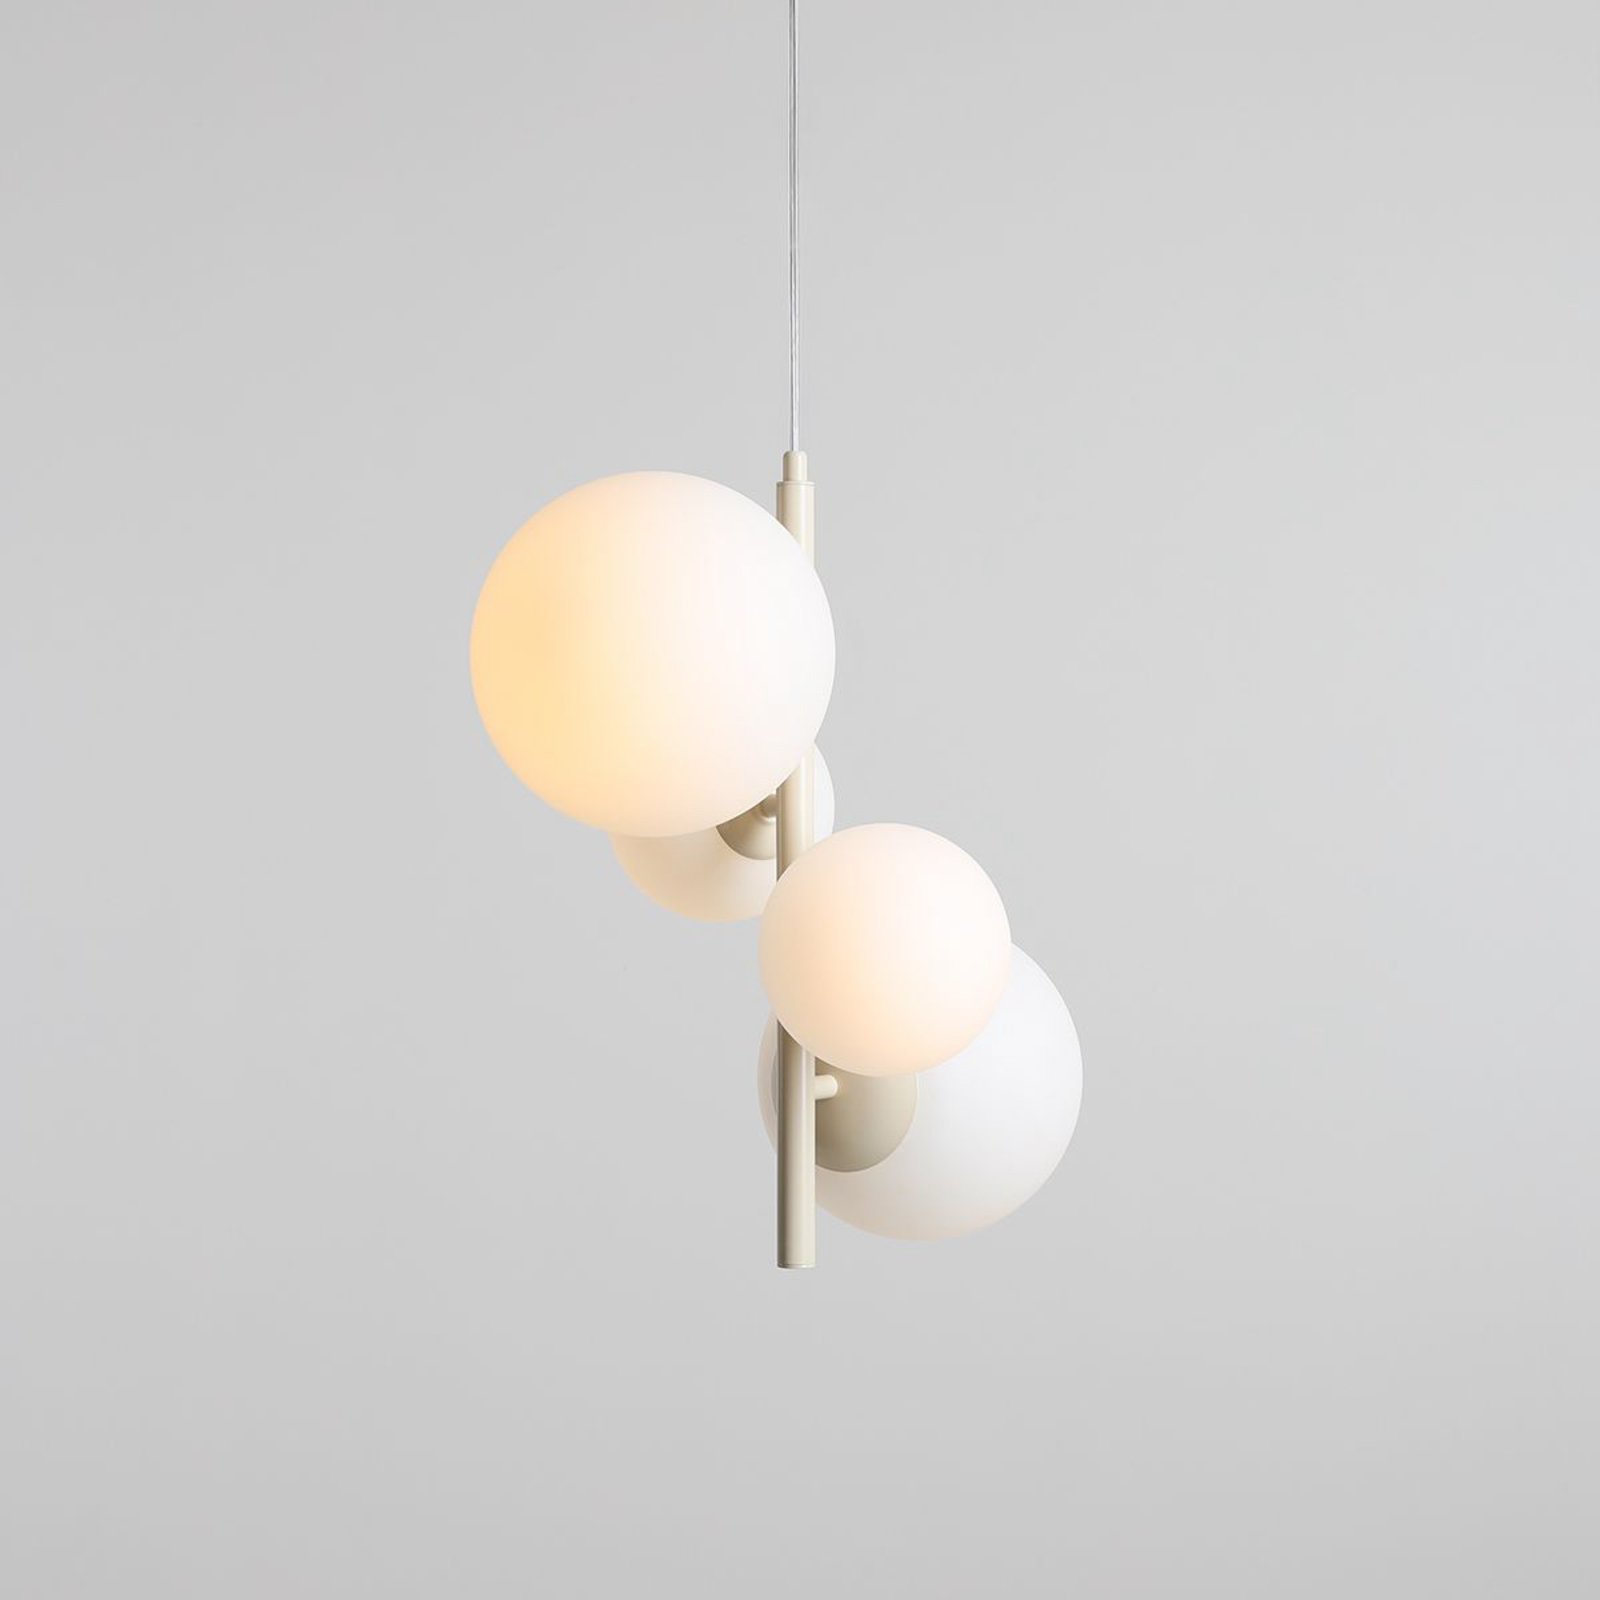 Hanglamp Dione, opaal/crème, 4-lamps